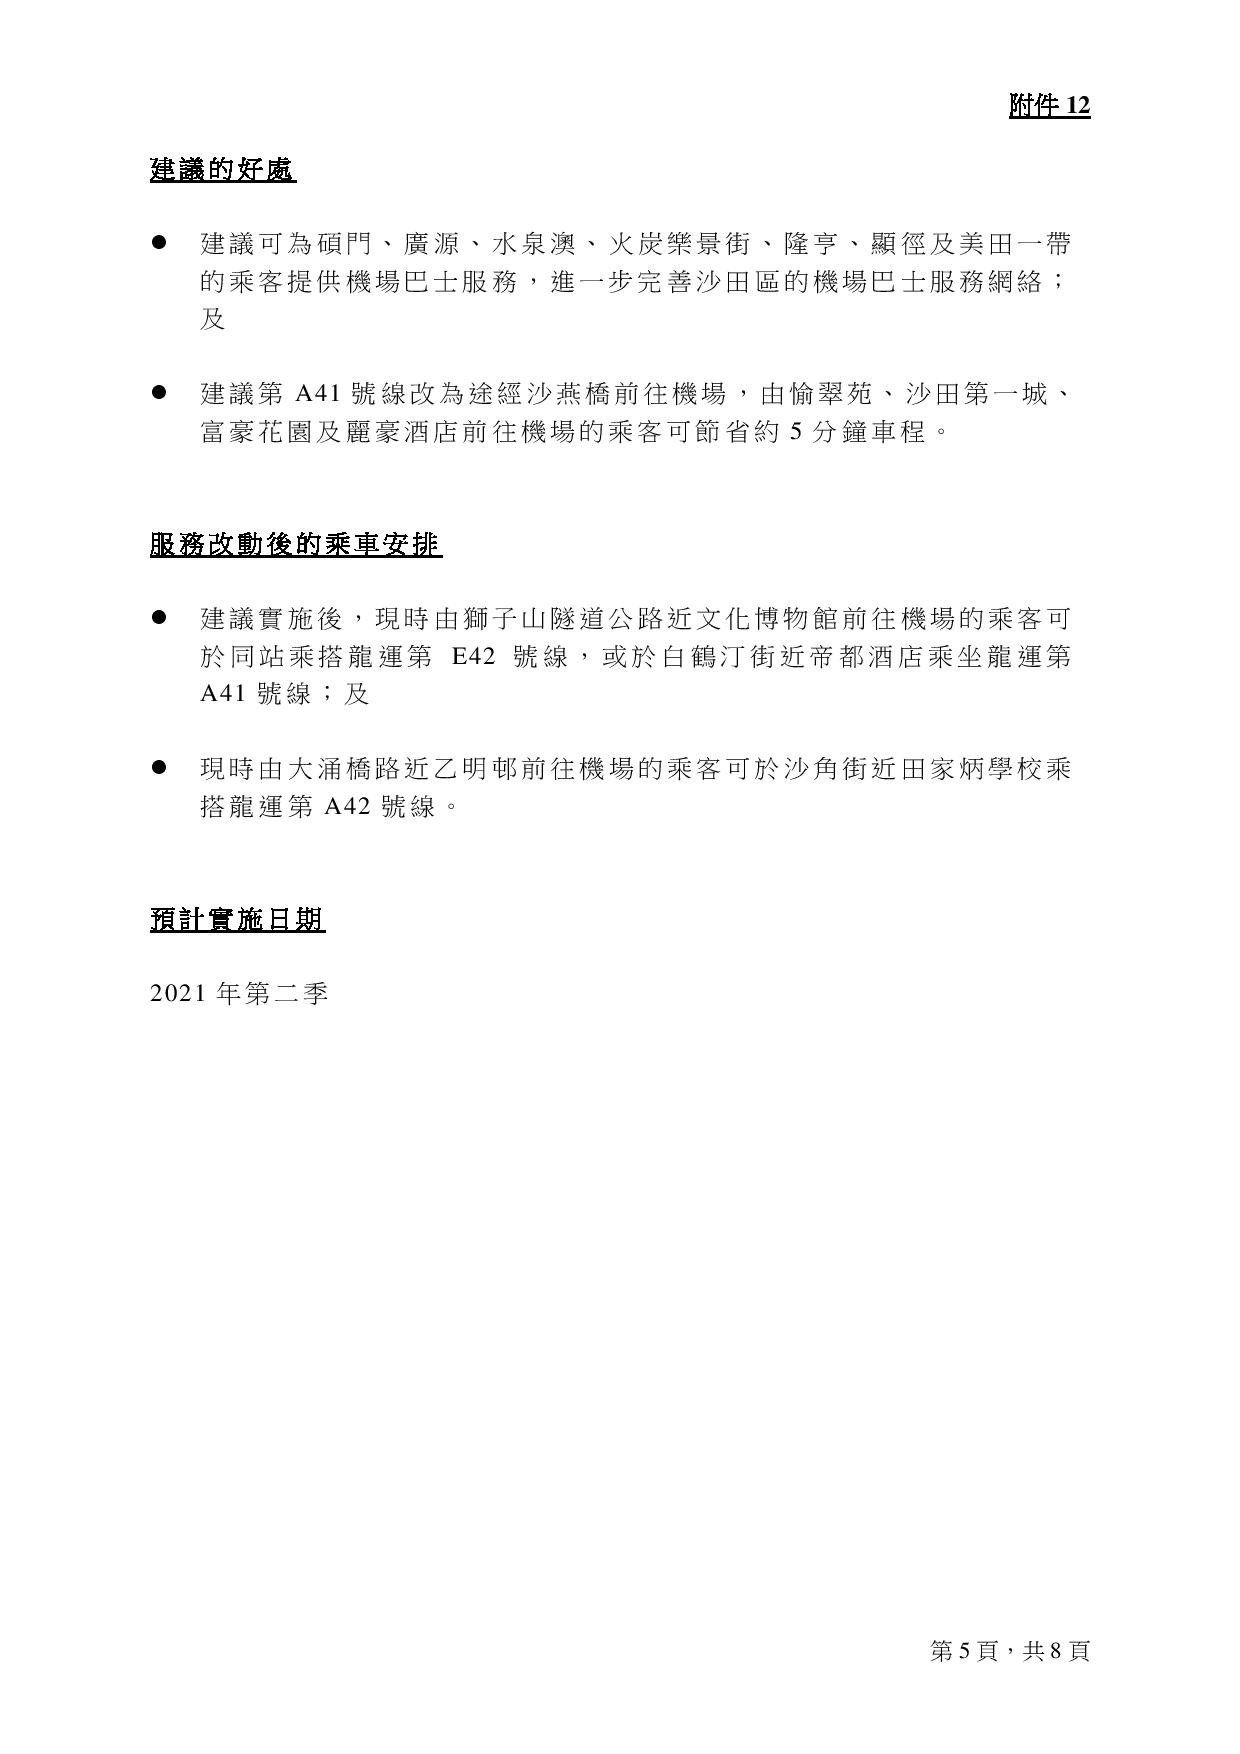 Document-page-052.jpg